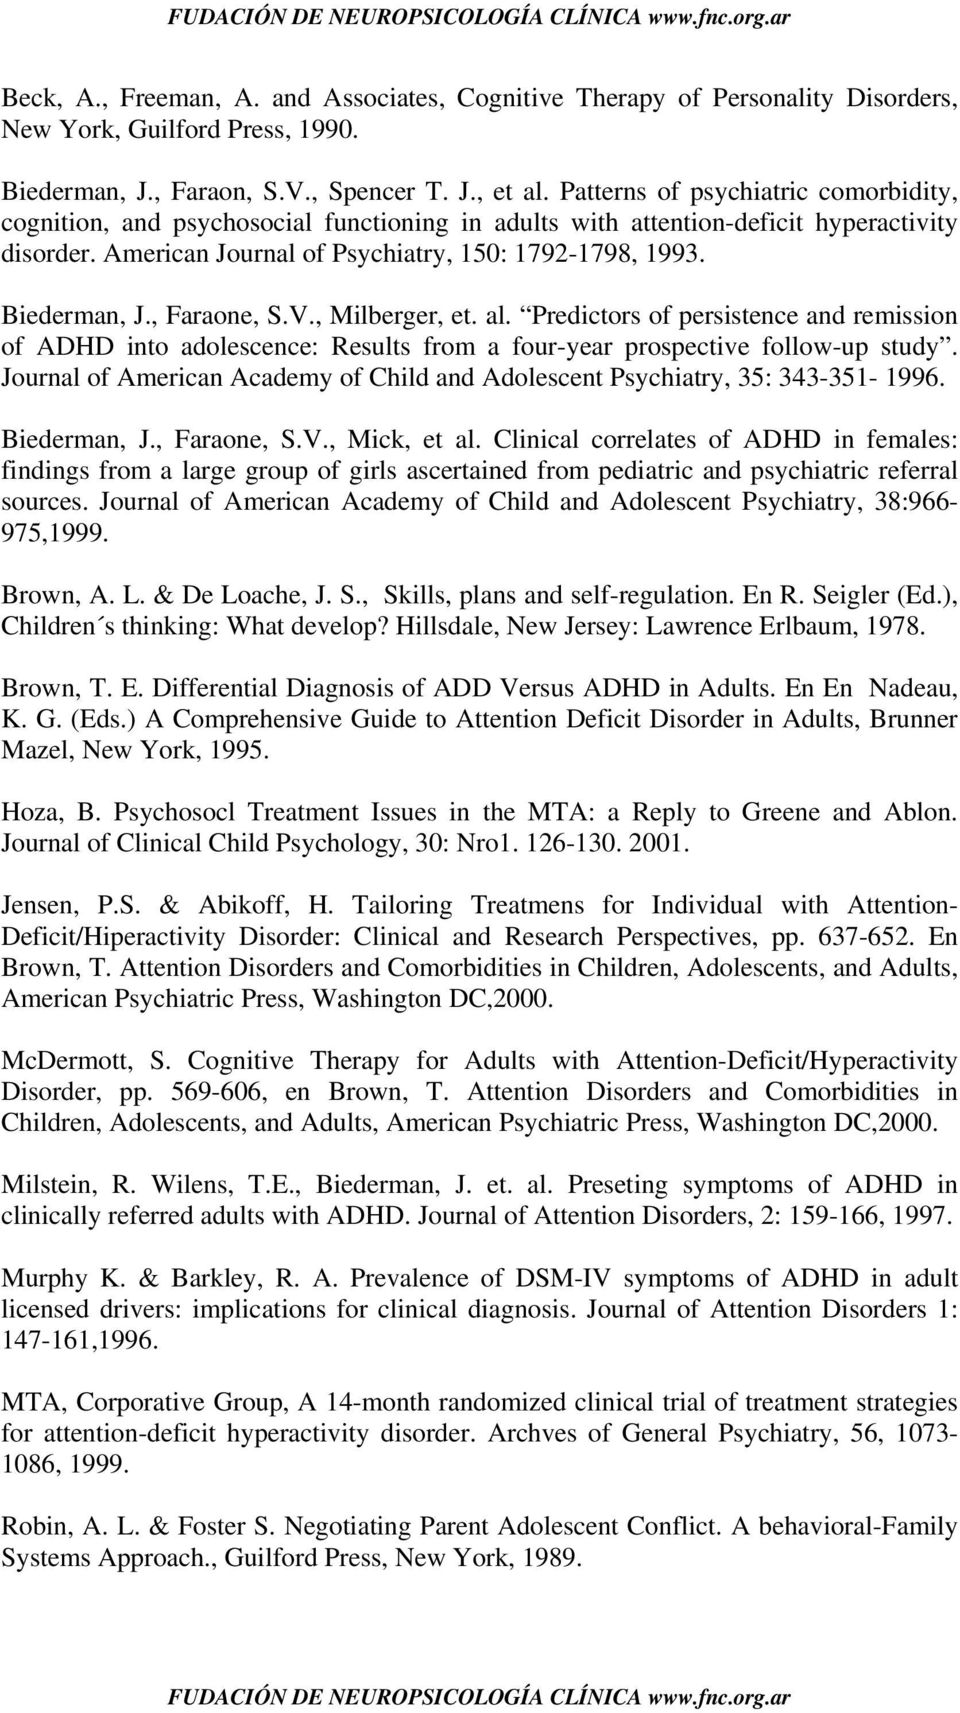 Biederman, J., Faraone, S.V., Milberger, et. al. Predictors of persistence and remission of ADHD into adolescence: Results from a four-year prospective follow-up study.